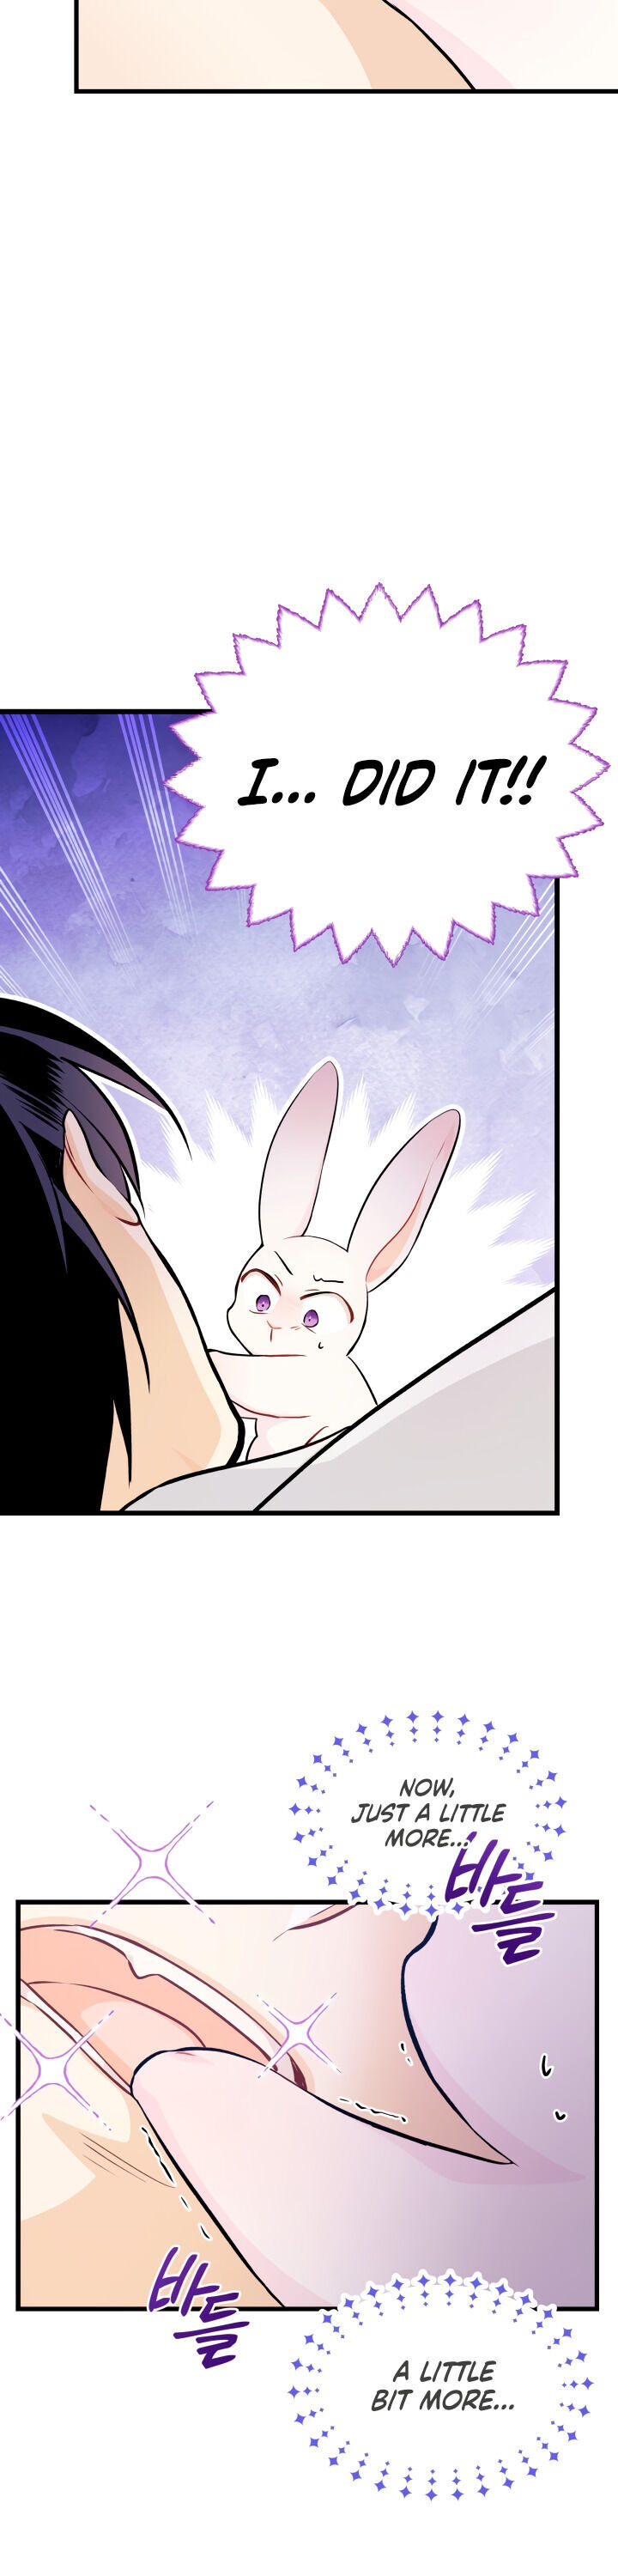 The Symbiotic Relationship Between A Rabbit and A Black Panther - Chapter 16 Page 16